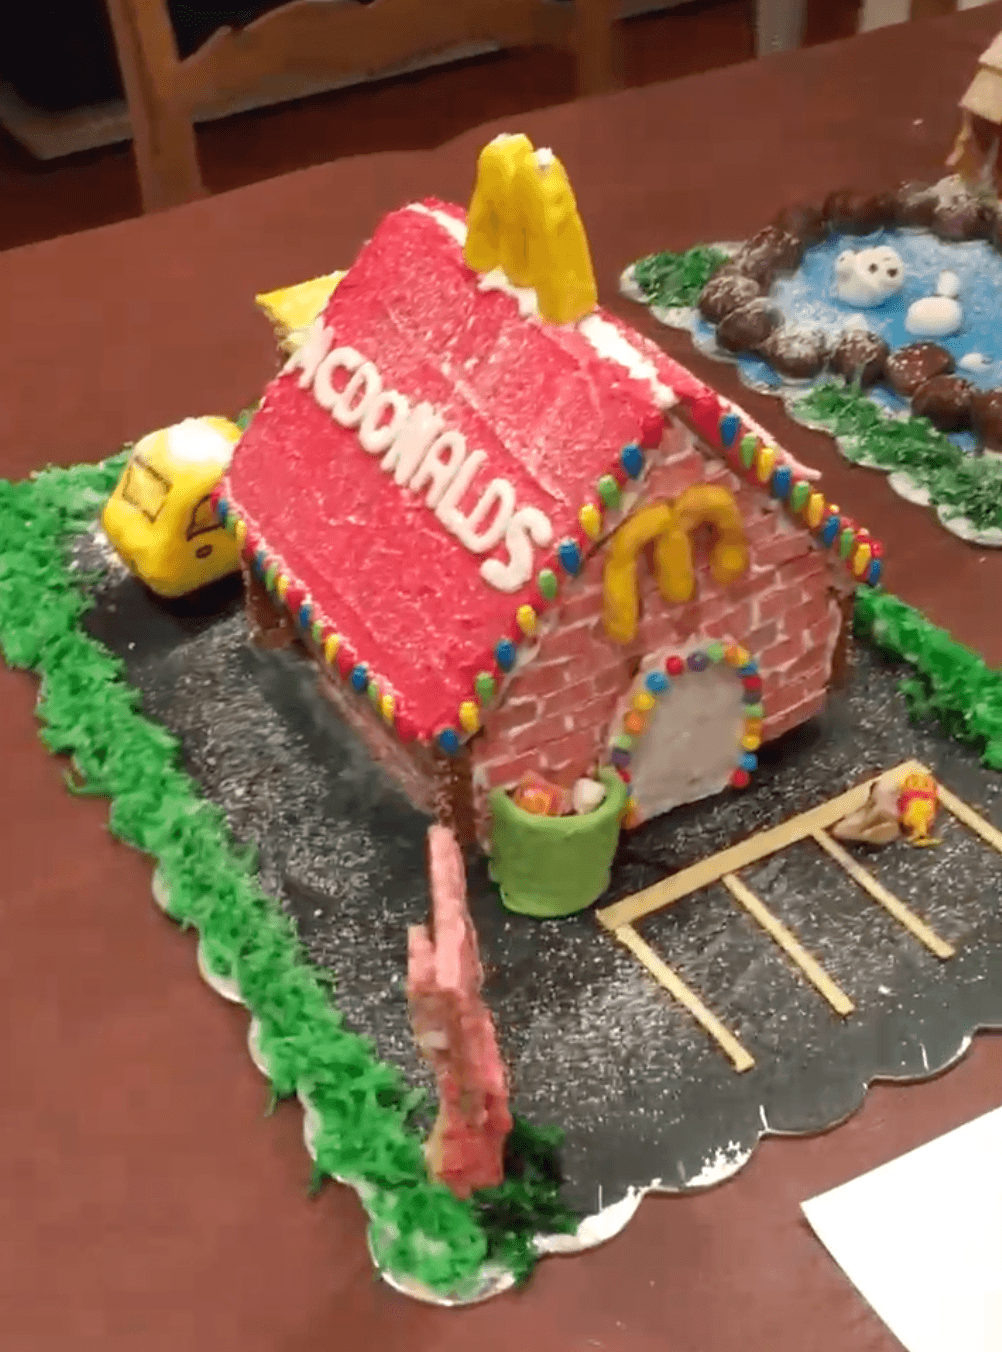 A McDonalds themed gingerbread was created in 2017. (Courtesy of Jack Tortora)